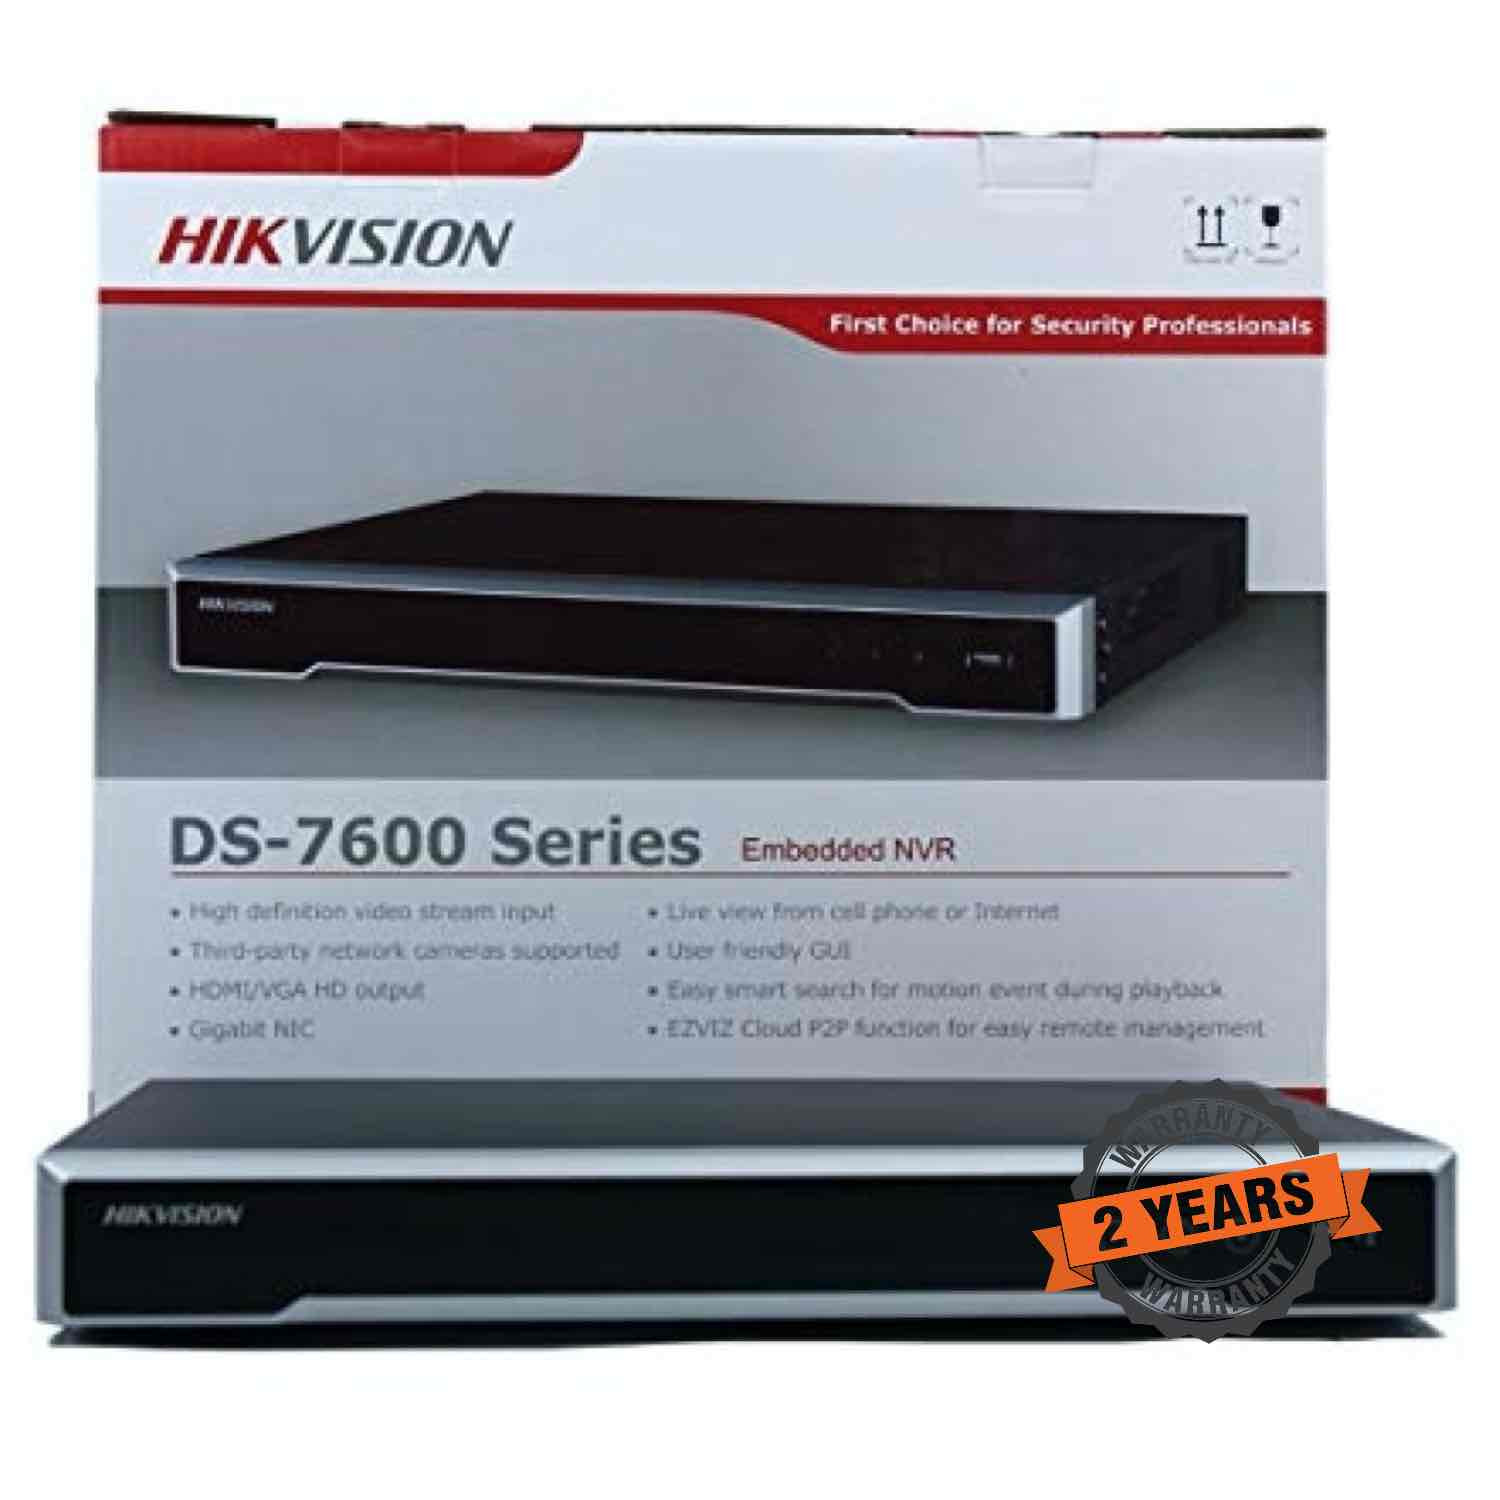 Hikvision DS-7616NI-Q2/16P 16ch Support POE 4k Nvr